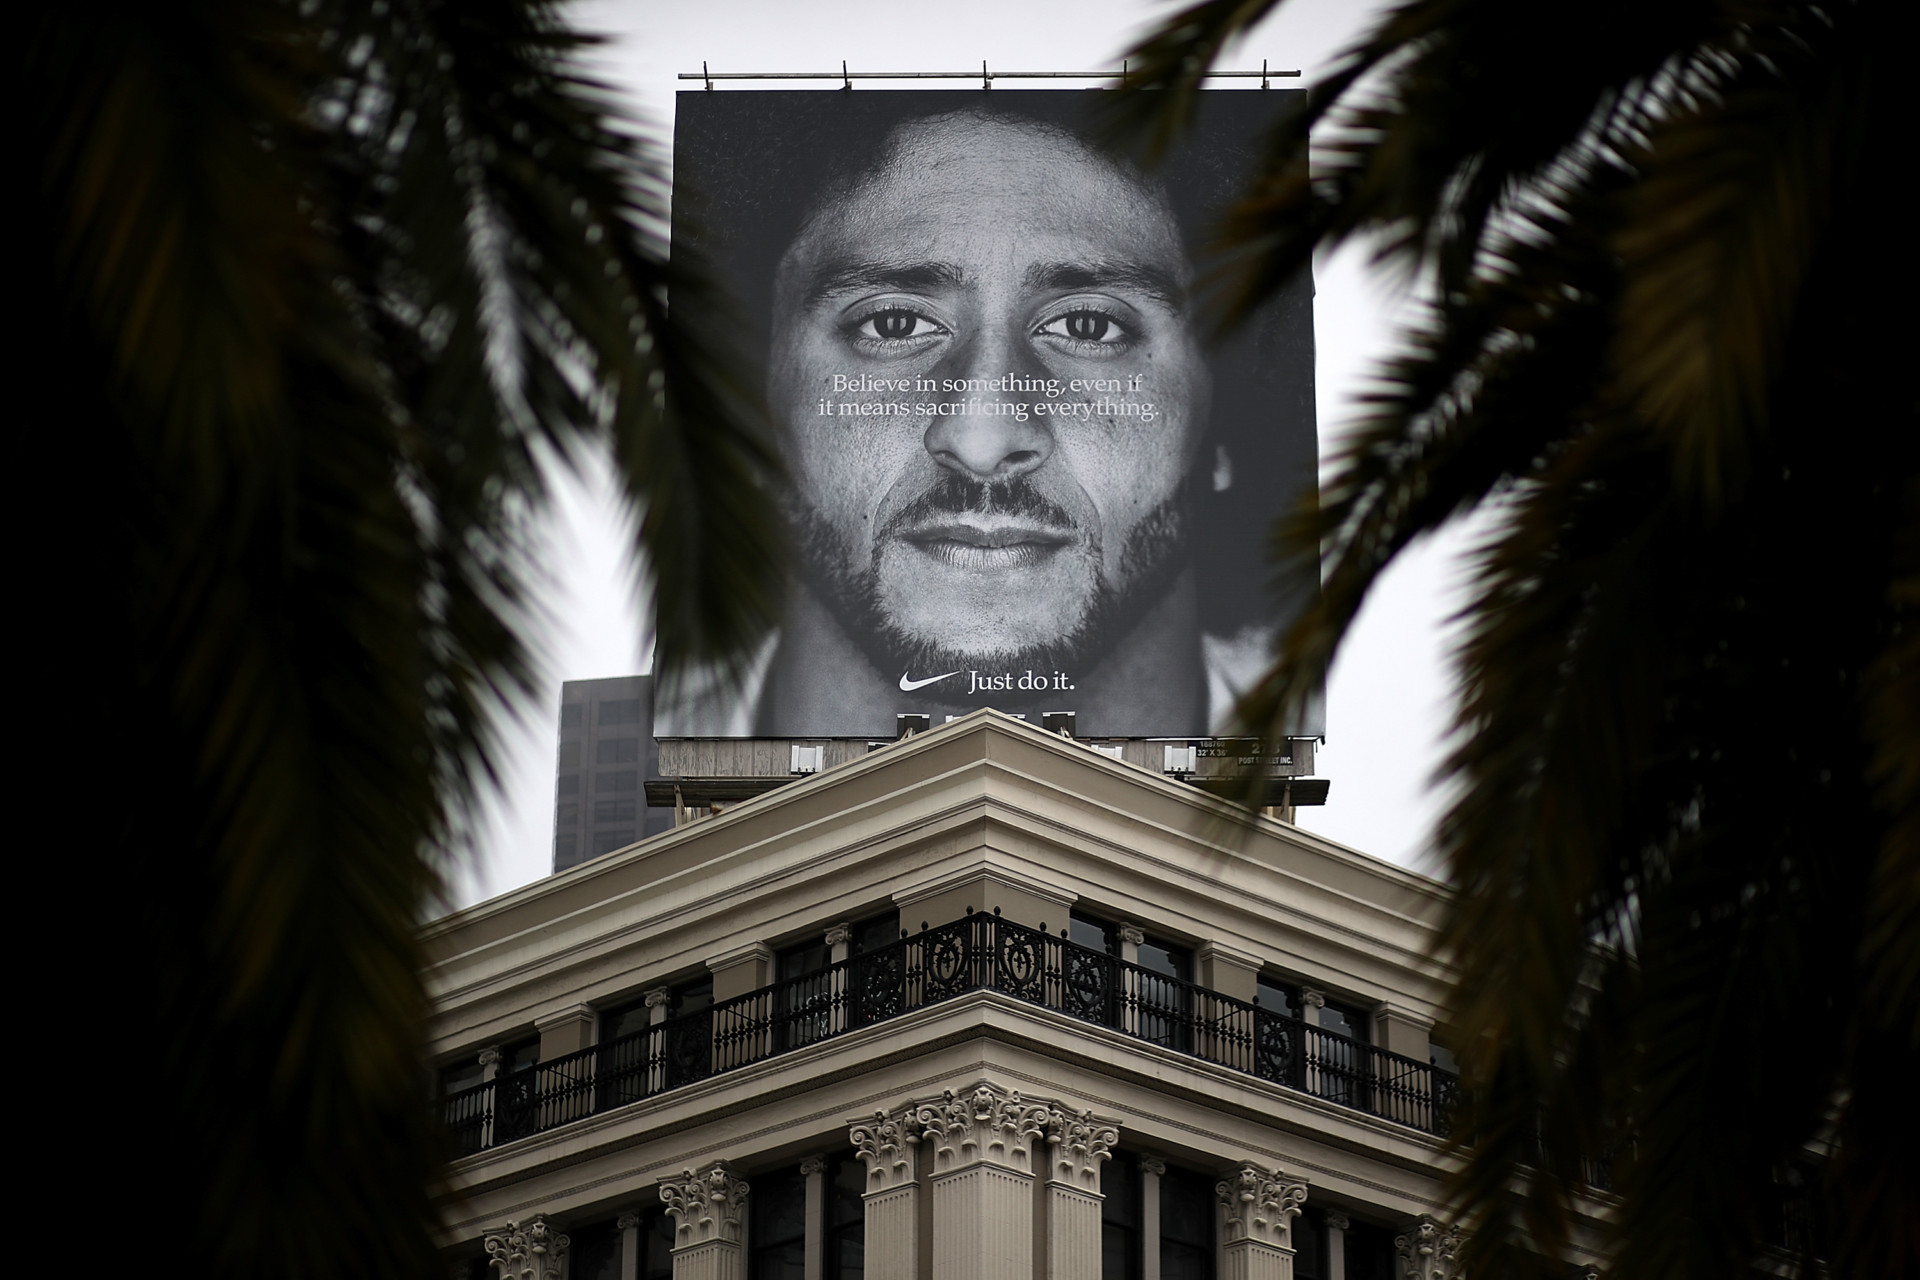 Nike's Reputation Took a Hit After Kaepernick Ad. Now